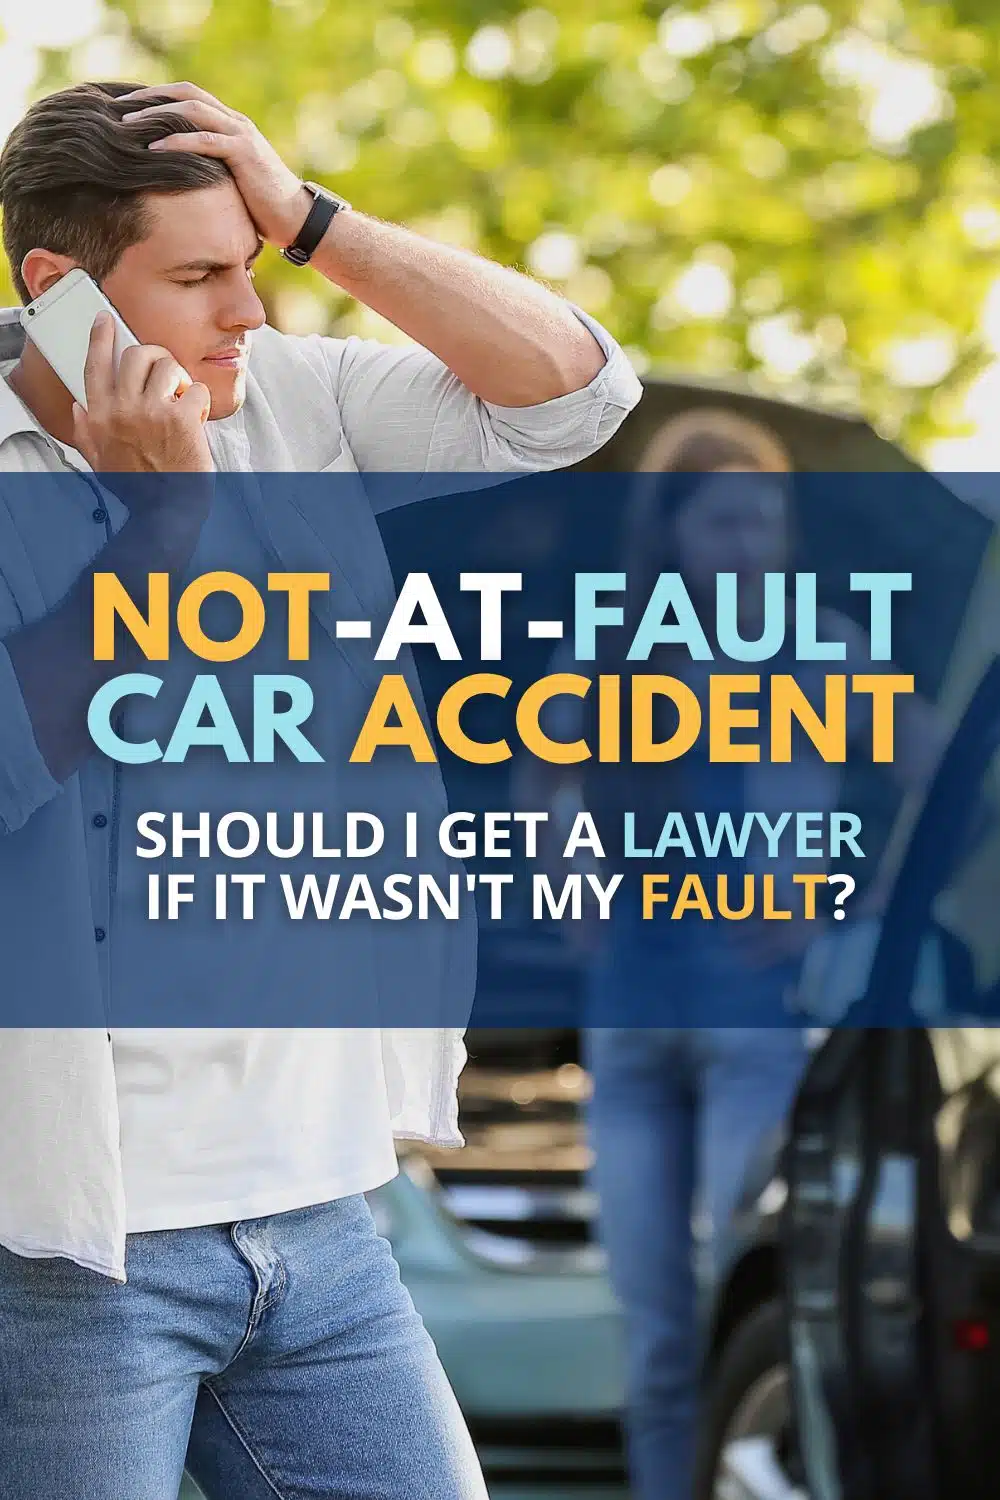 Should I Get A Lawyer For A Car Accident That Wasn’t My Fault?